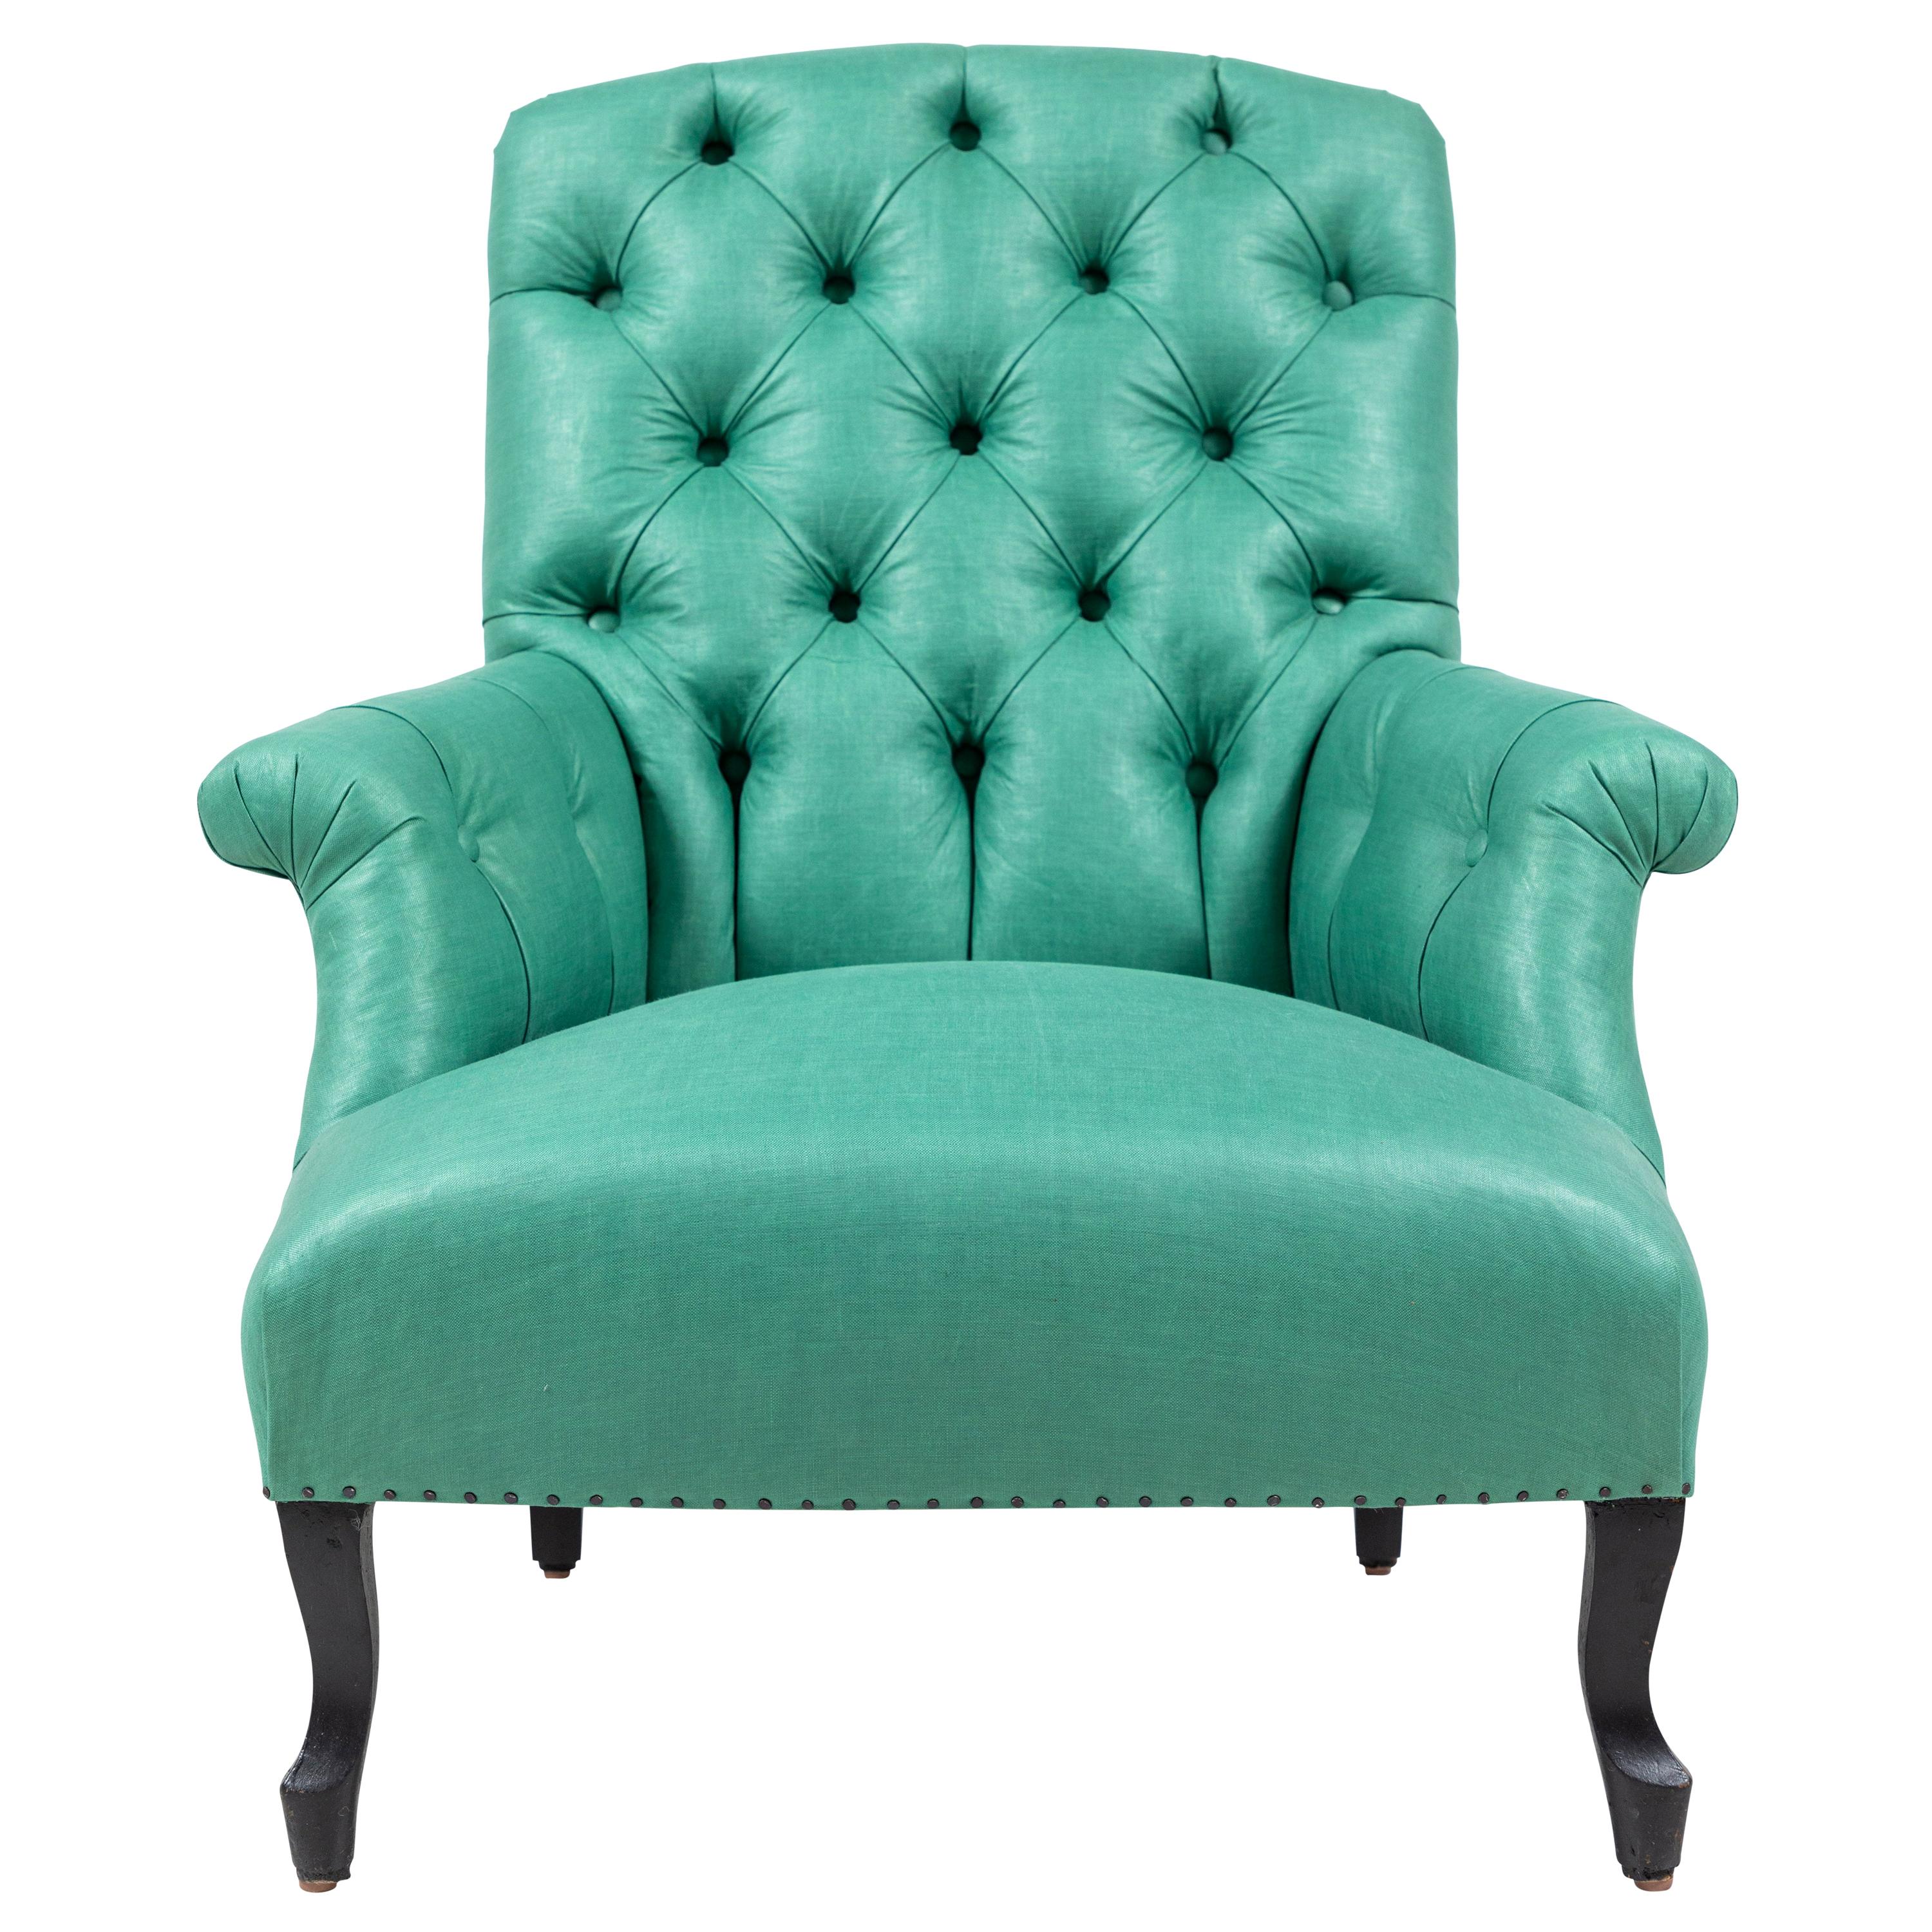 Pair of Green French Tufted Club Chairs